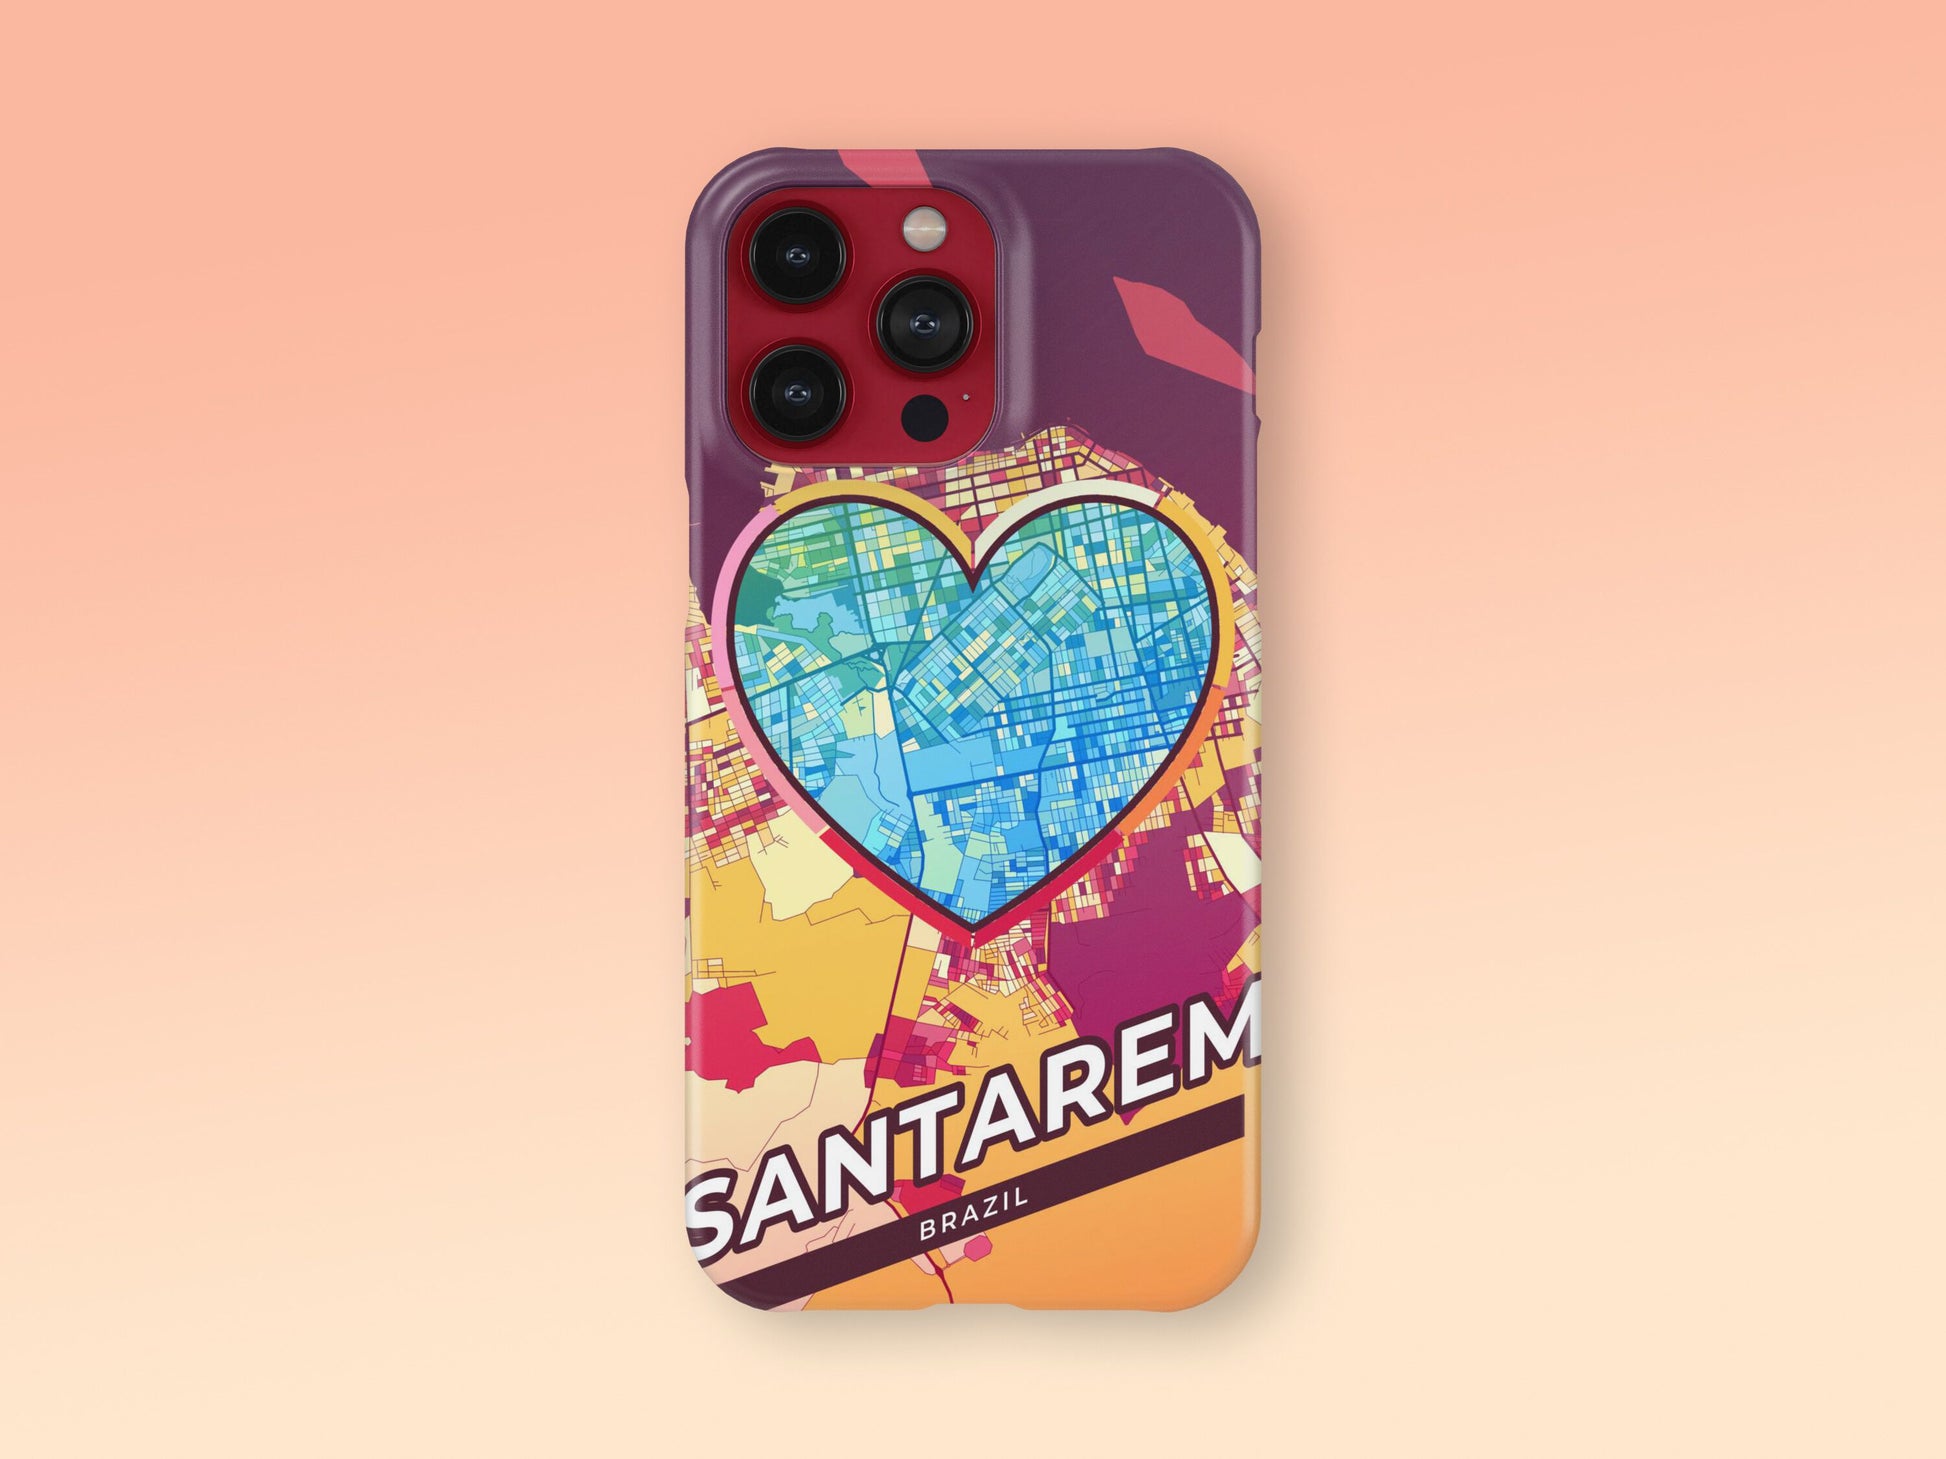 Santarem Brazil slim phone case with colorful icon. Birthday, wedding or housewarming gift. Couple match cases. 2